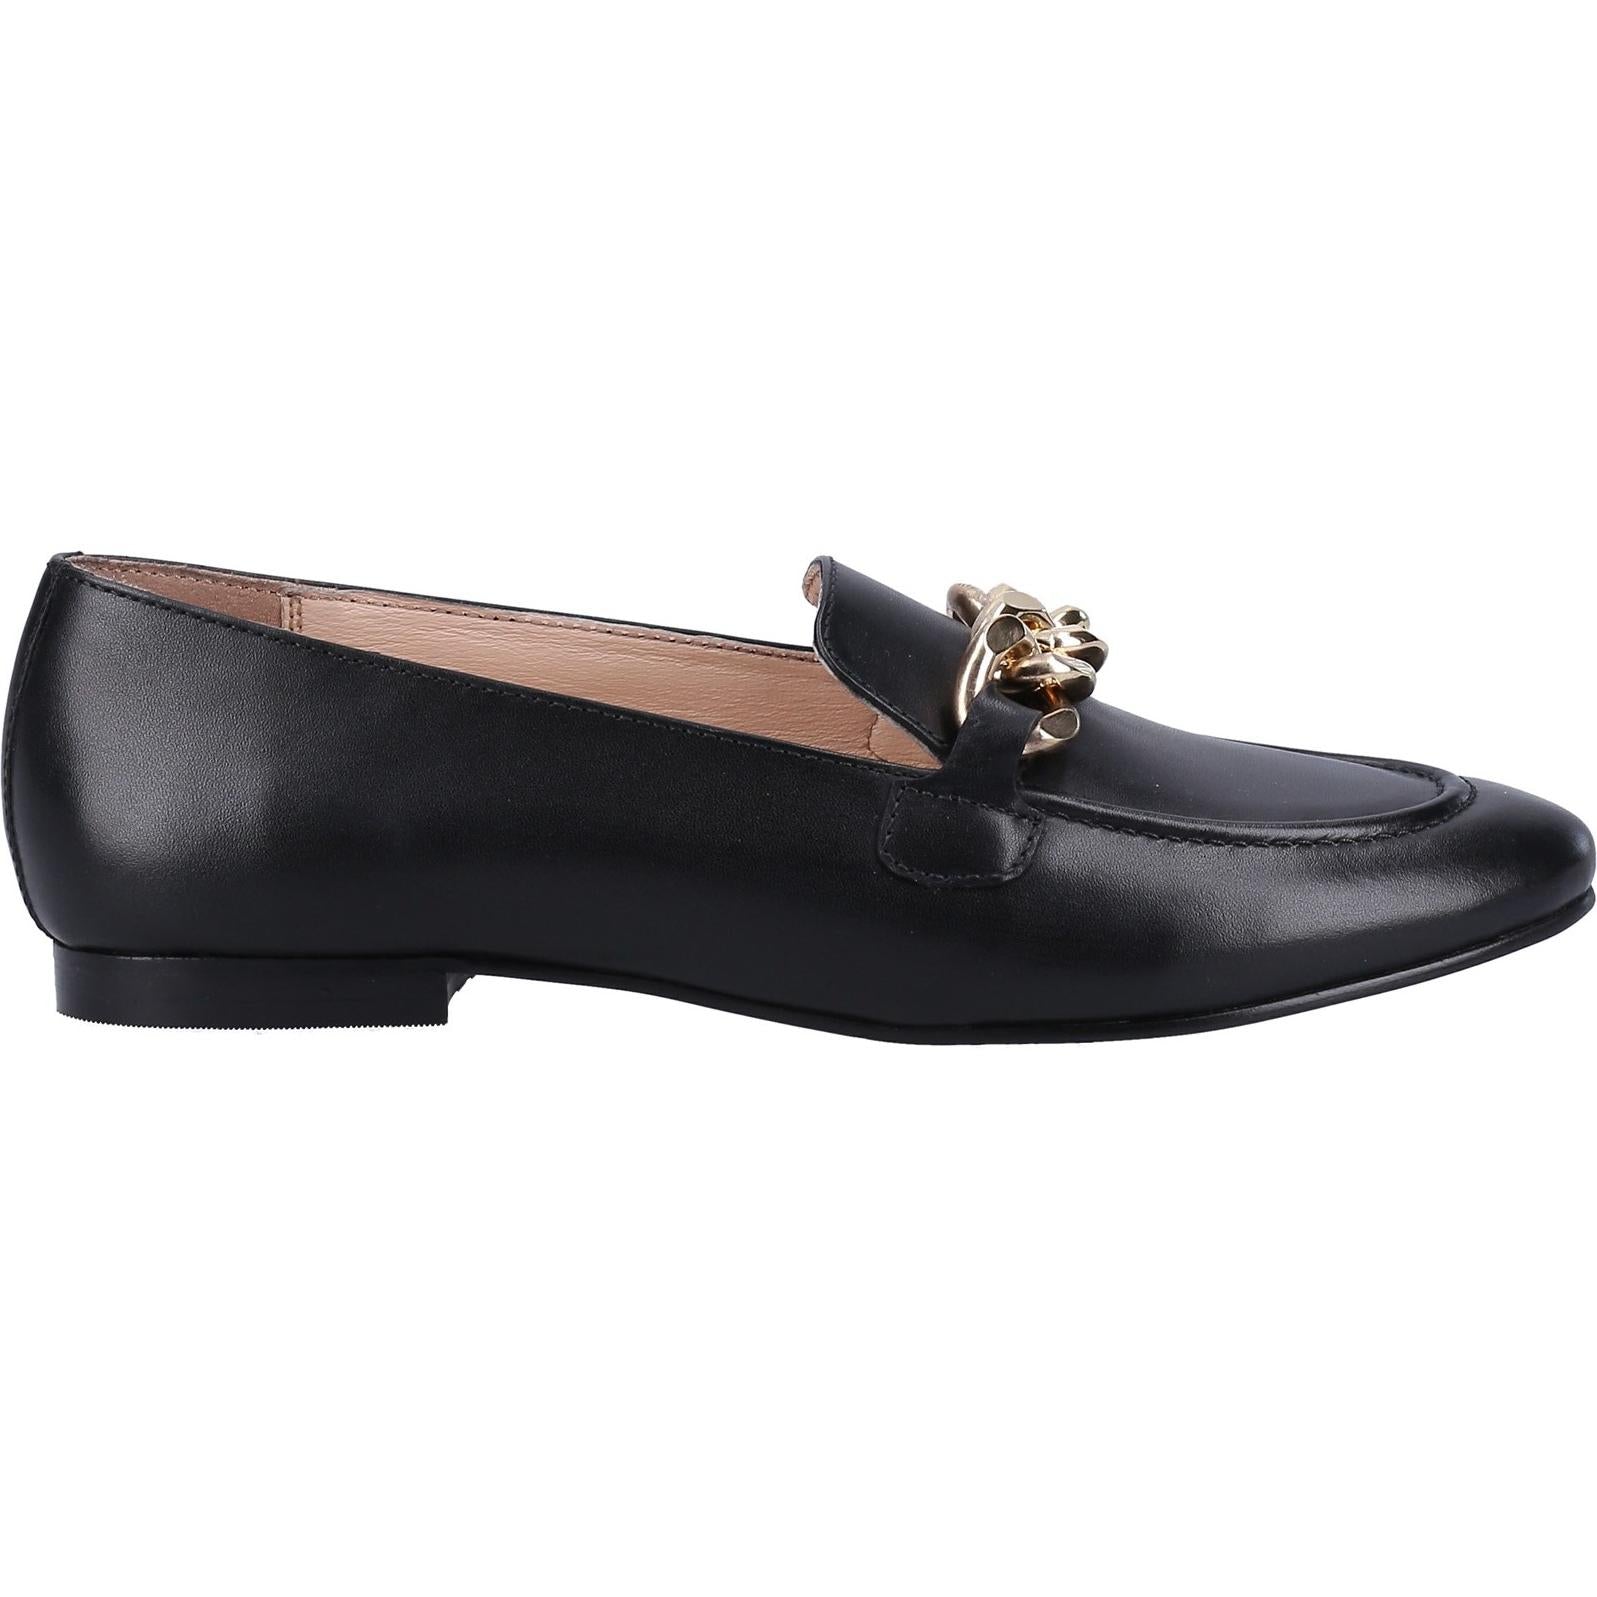 Hush Puppies Harper Chain Loafer Shoes